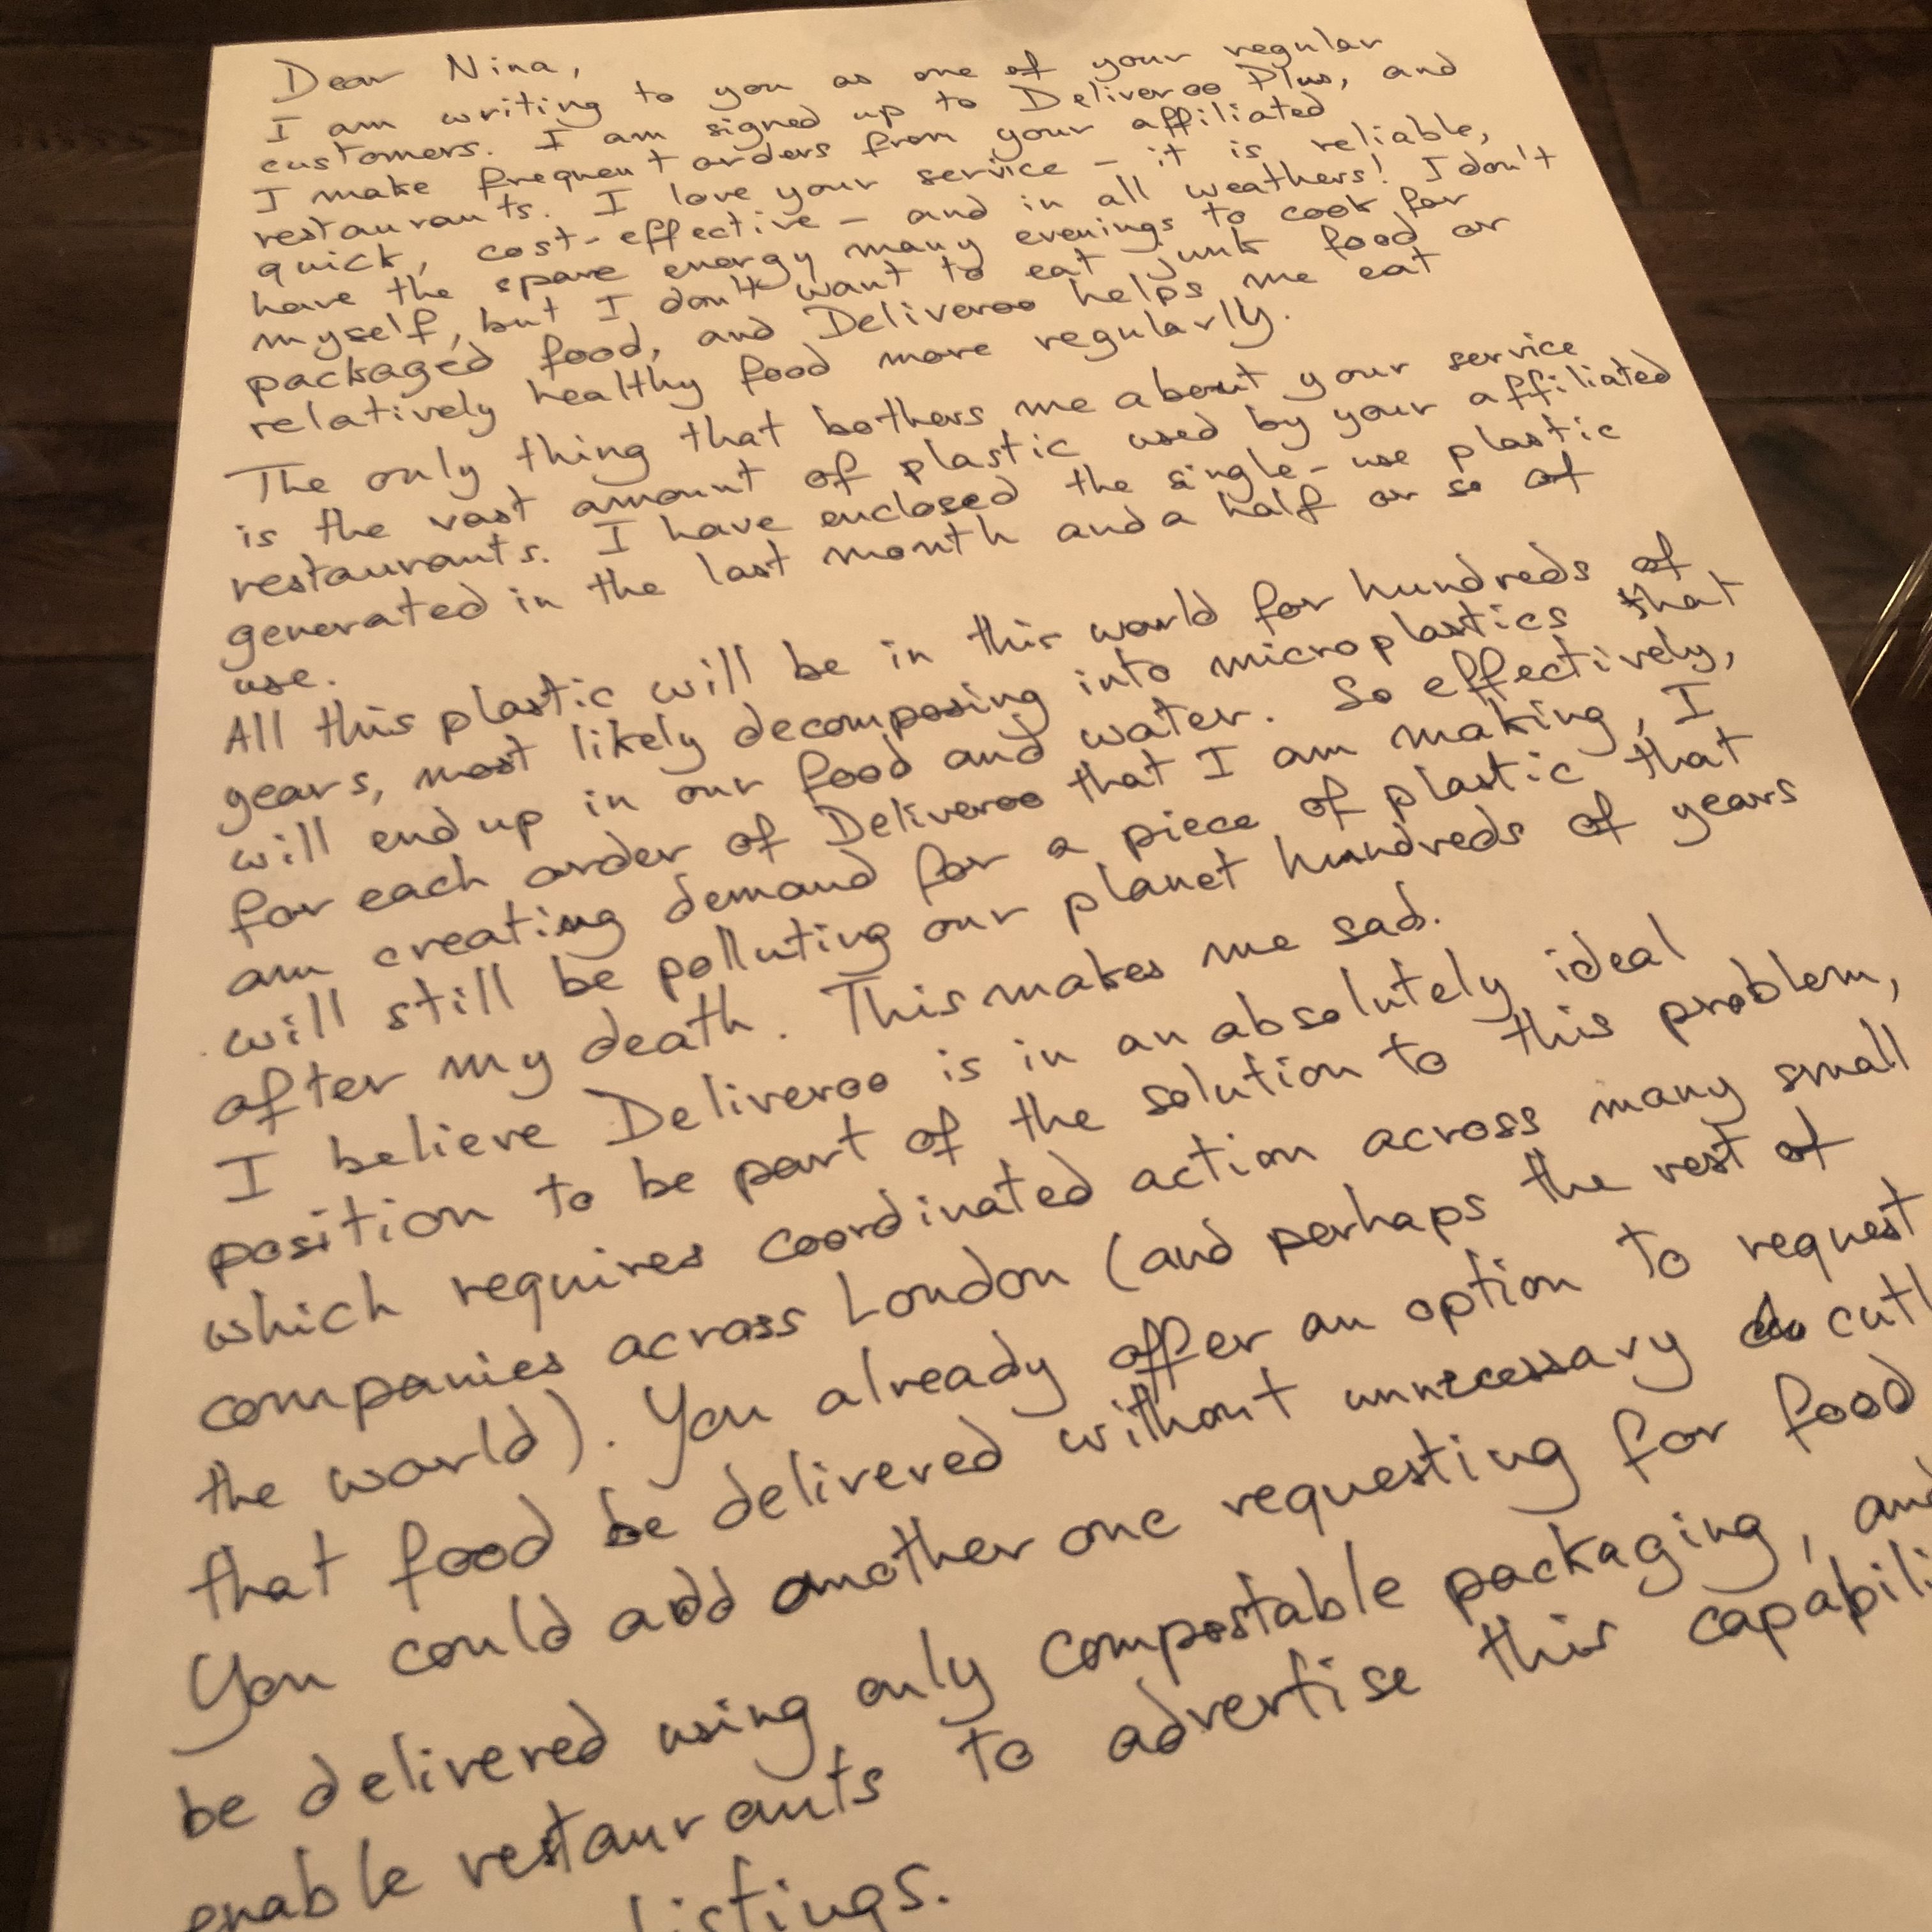 Shot of a hand-written version of the letter